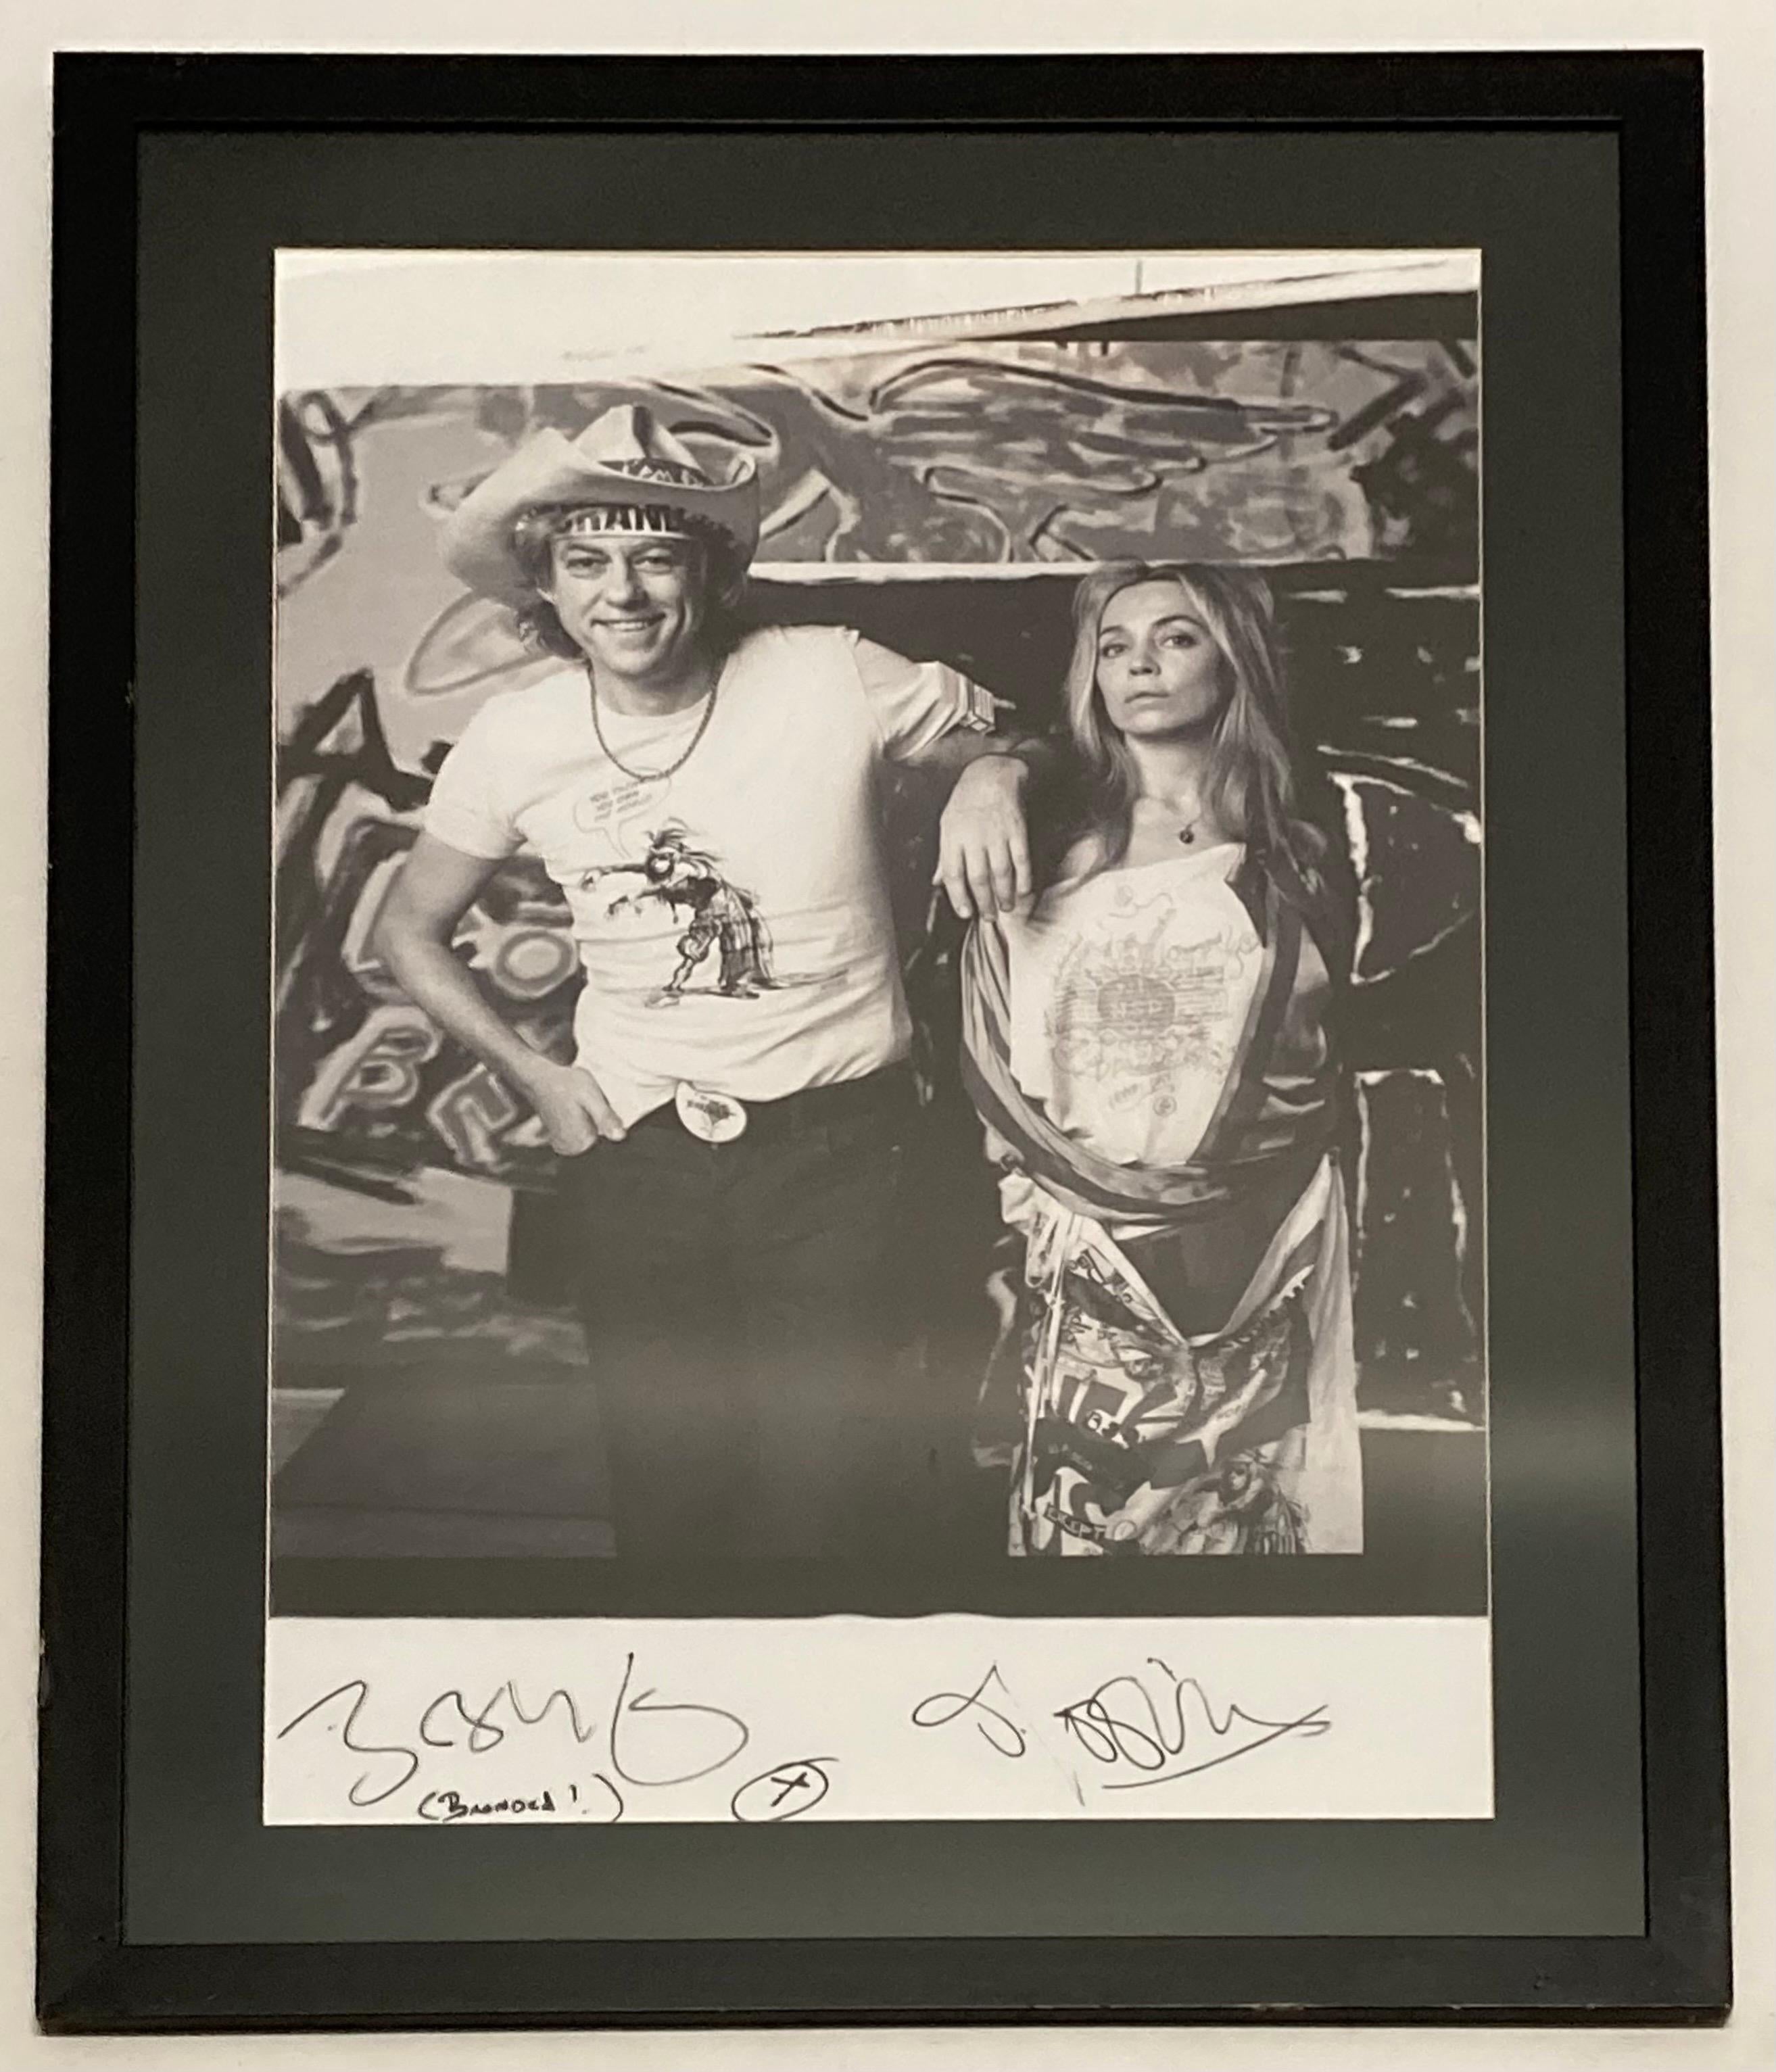 A large format polaroid of Bob Geldoff & Jeanne Marine for the Vivienne Westwood Active Resistance limited edition book produced by Opus. Photographer Zenon Texeira.

Signed by Bob Geldoff & Jeanne Marine in marker pen.

Taken for the Vivienne